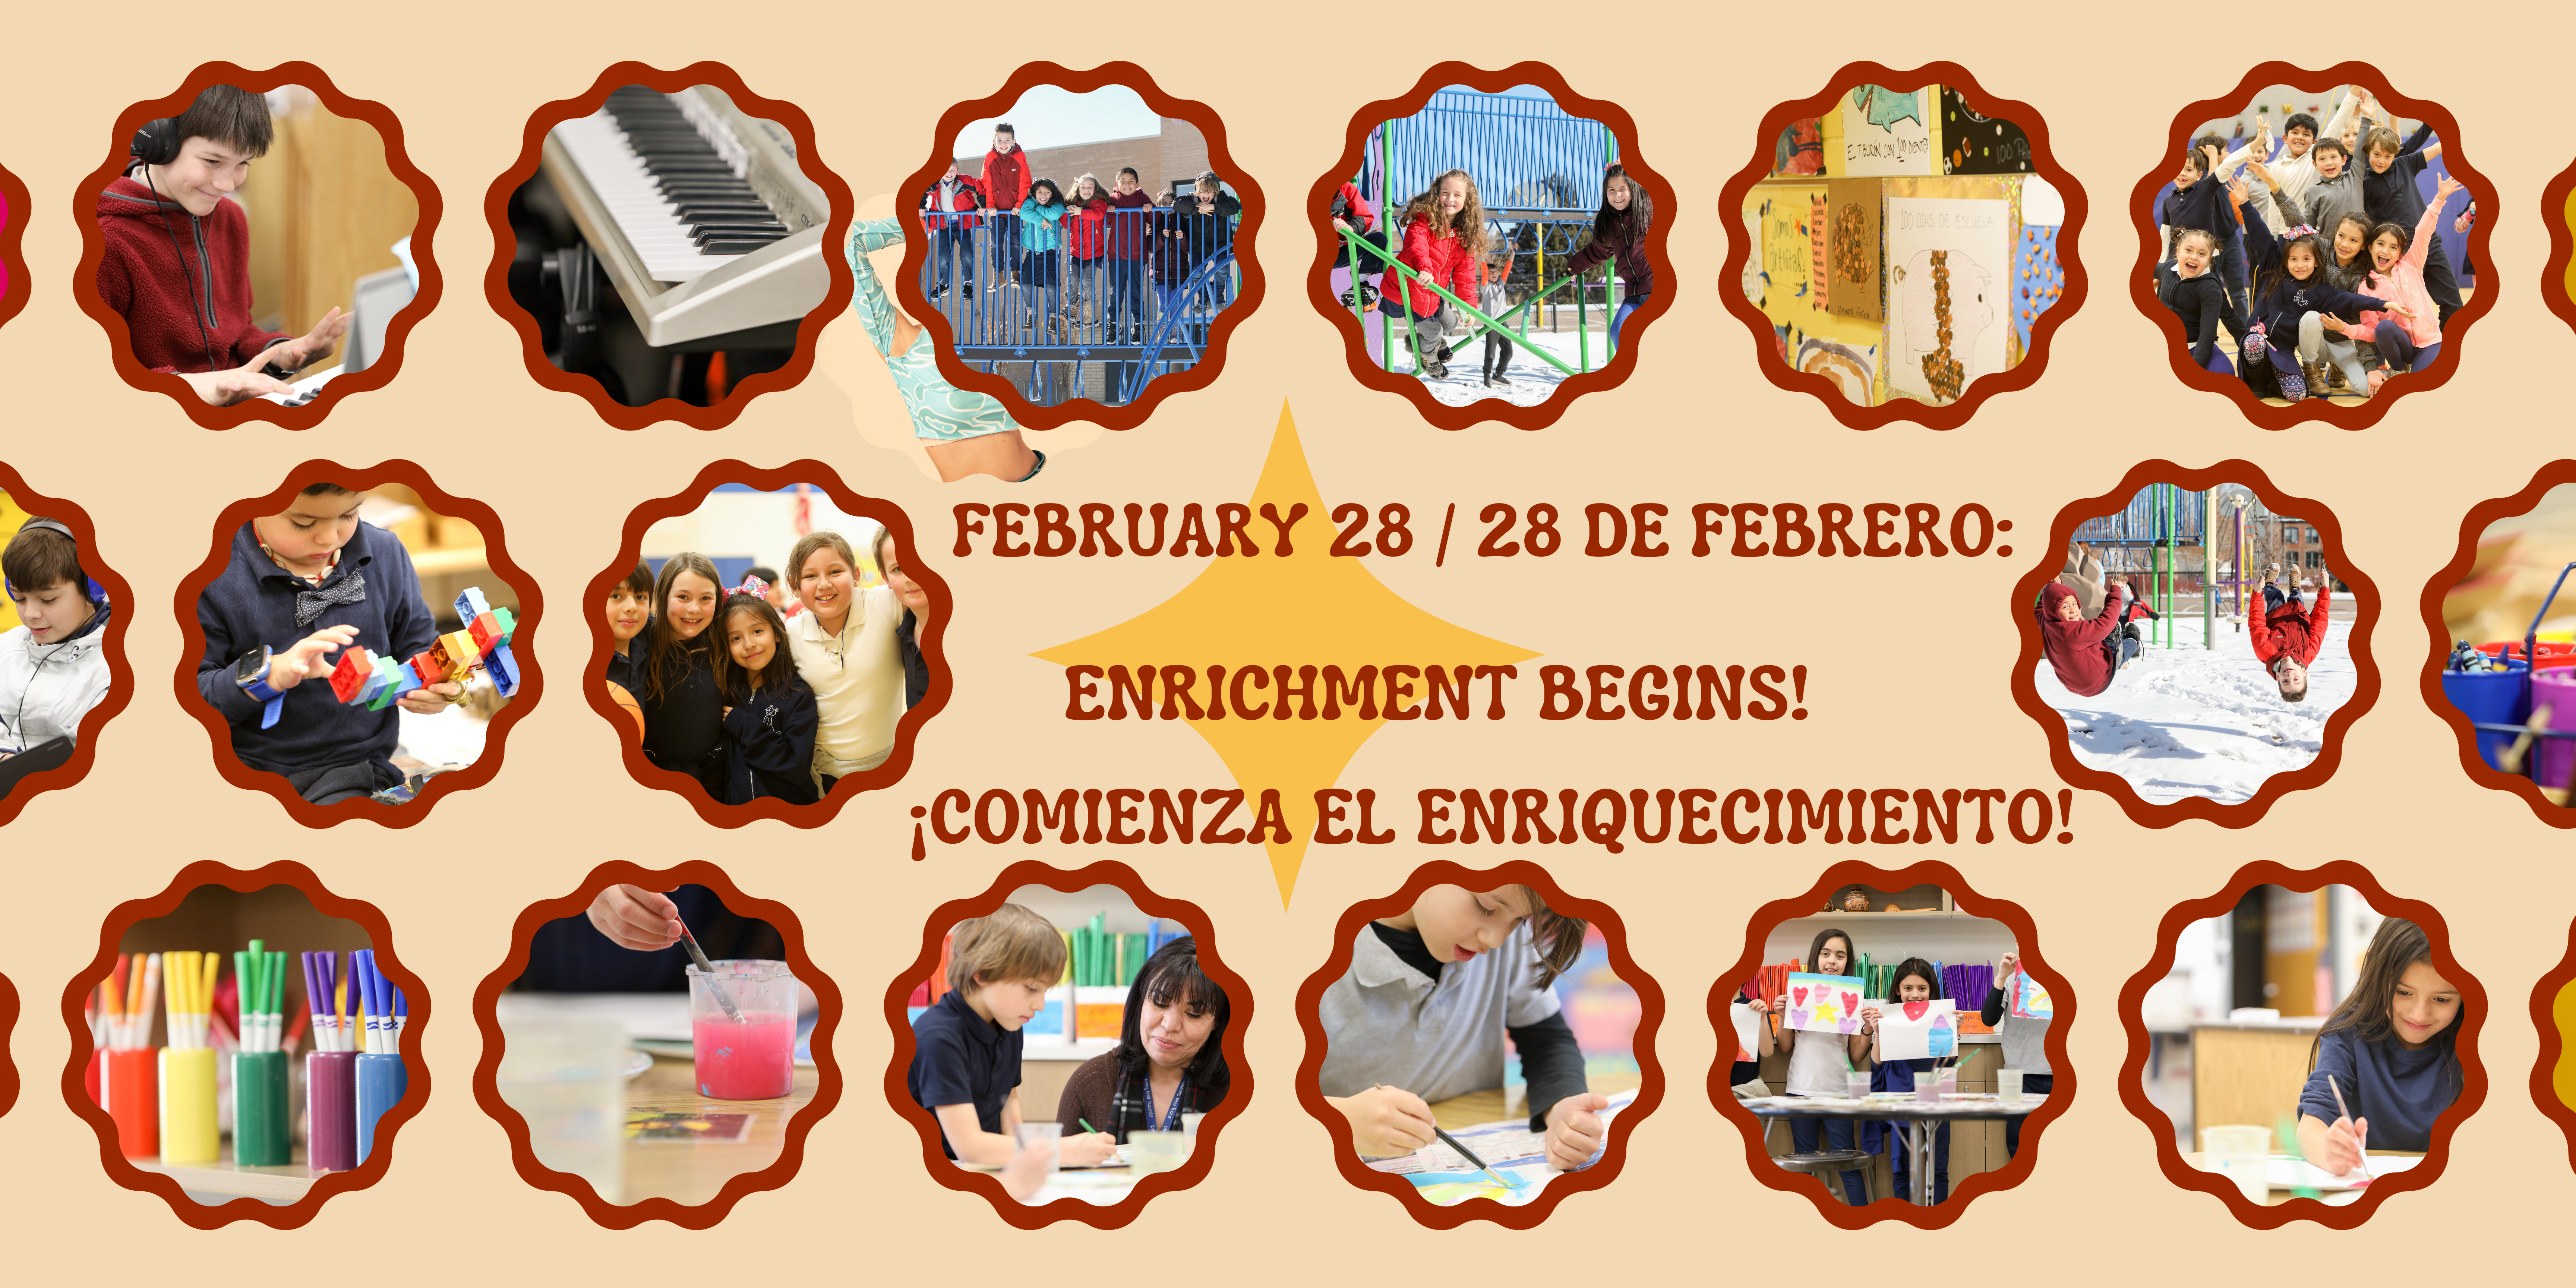 Red text says "February 28 / 28 de Febrero:" and "Enrichment Begins!" and "¡Comienza el Enriquecimiento!" on pale orange background. Images of students making art, playing on the playground, playing piano, playing with legos..